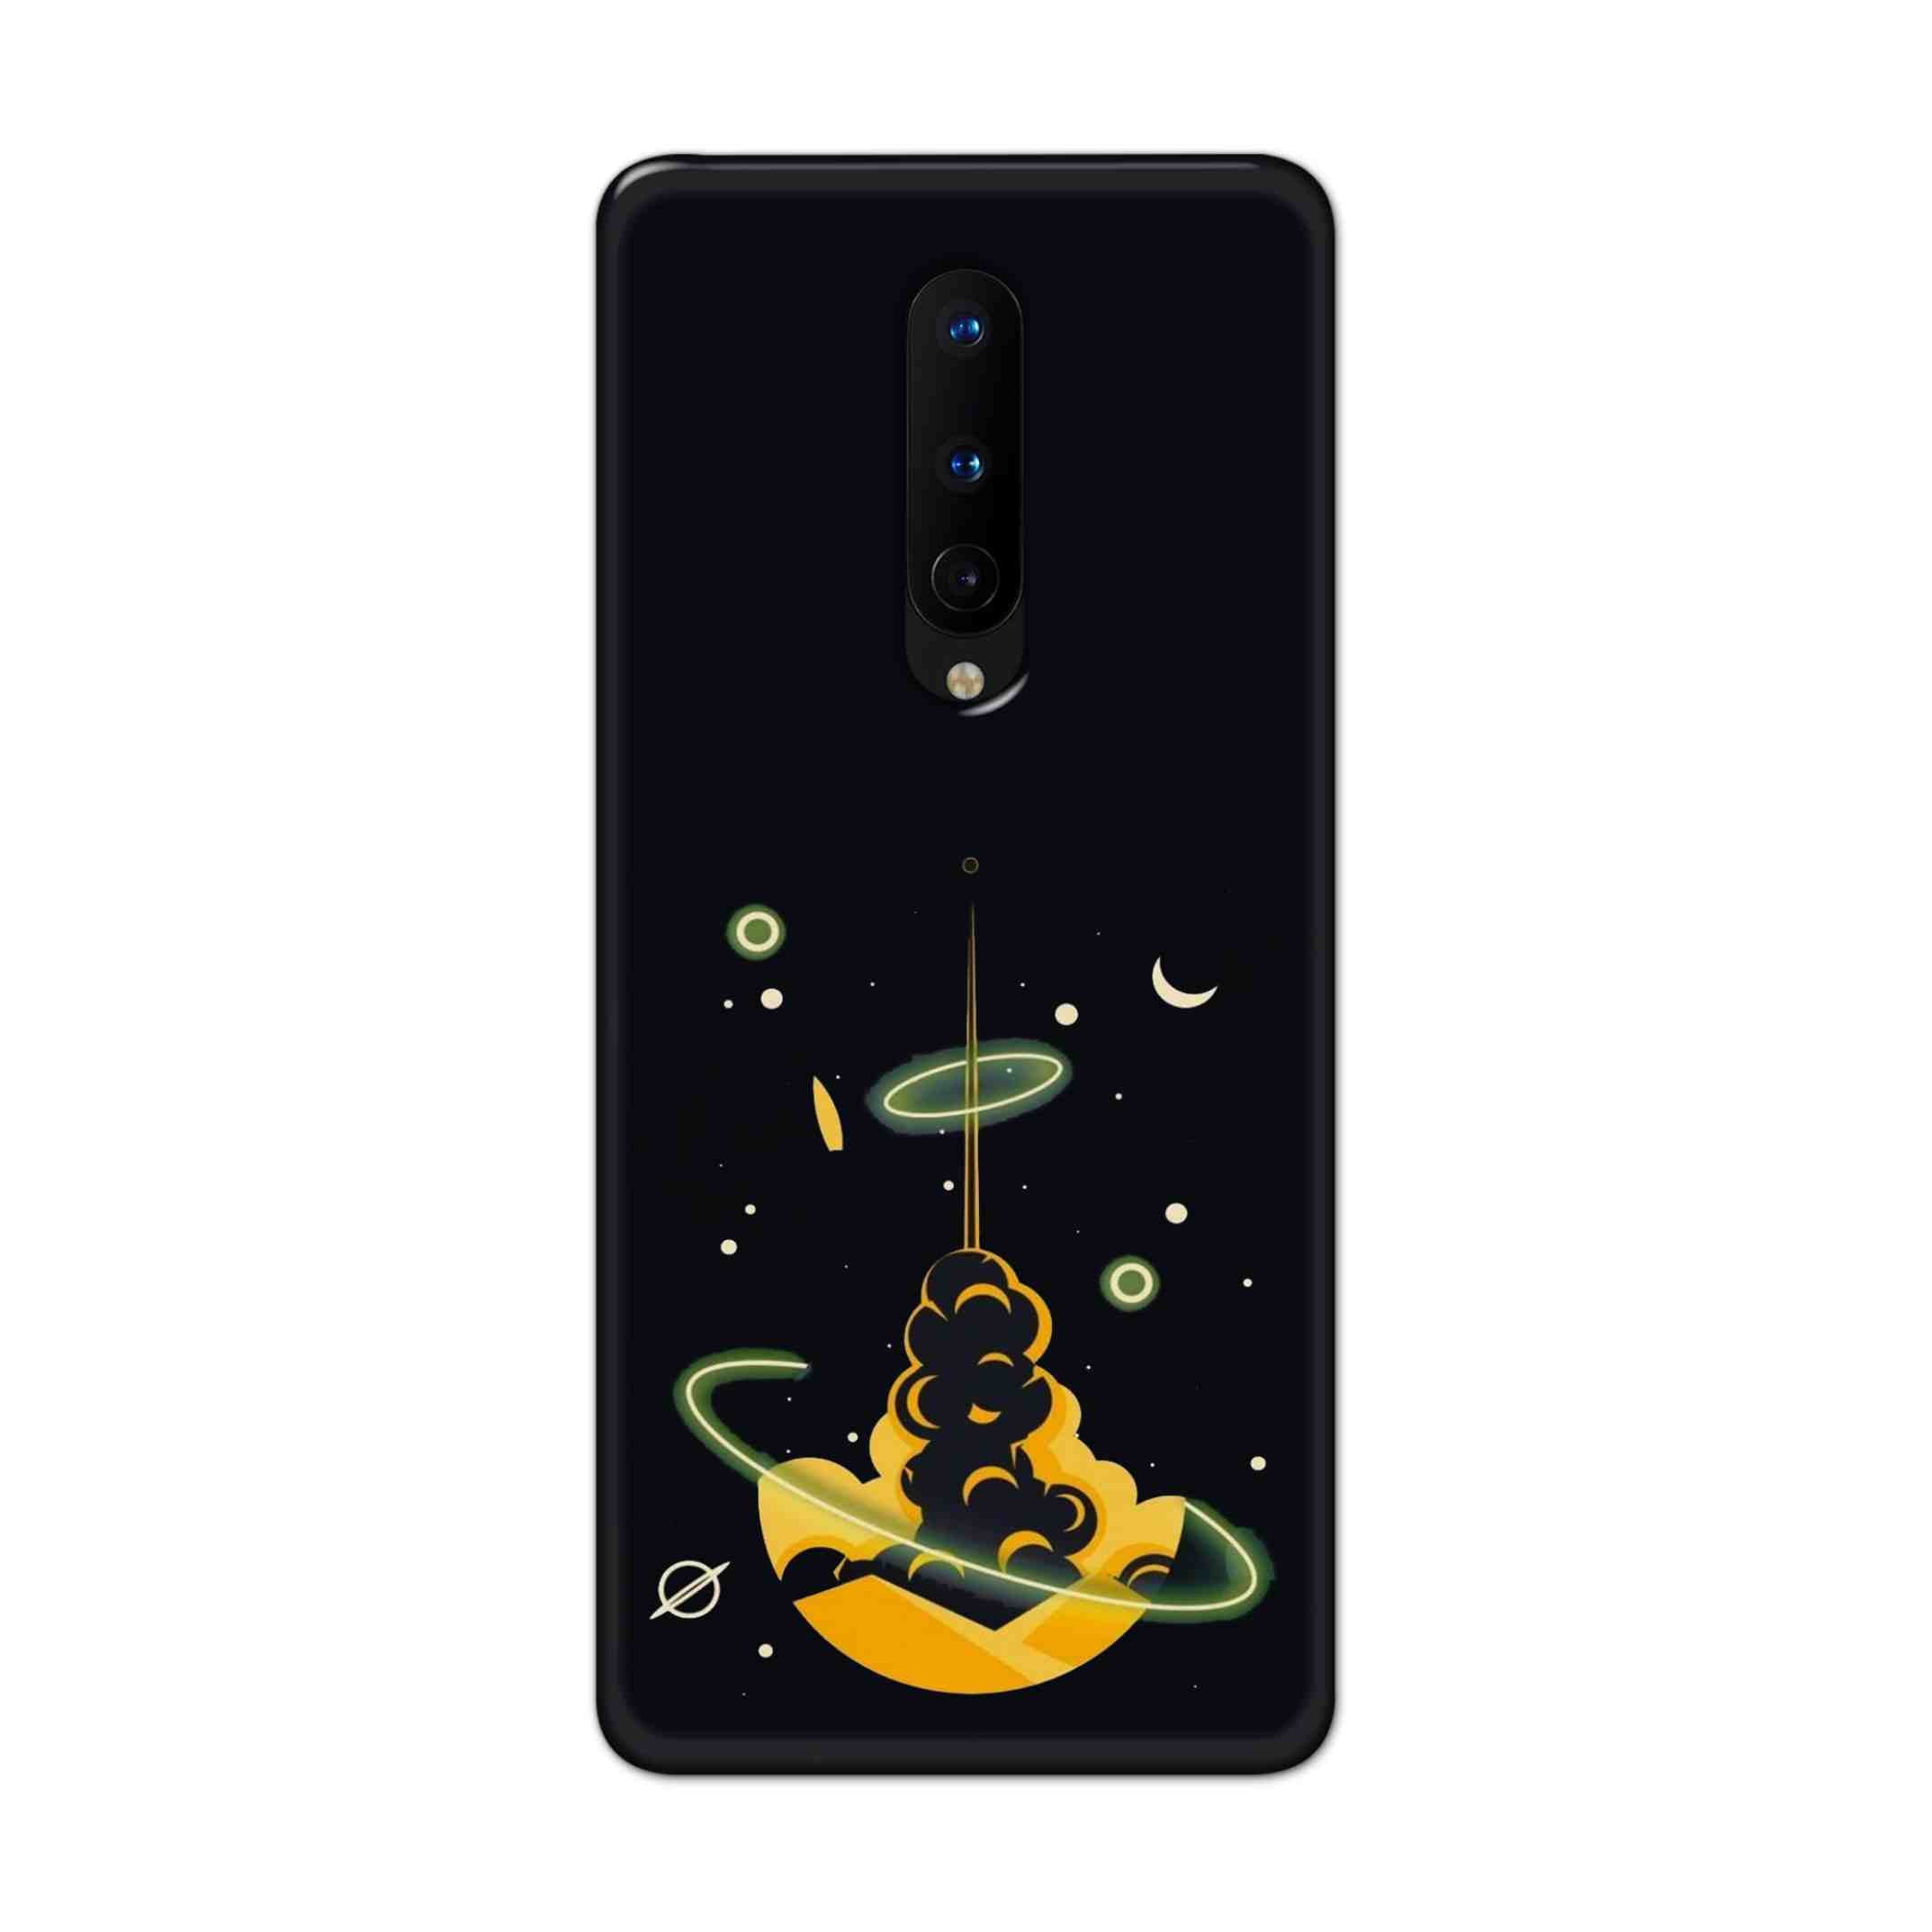 Buy Moon Hard Back Mobile Phone Case Cover For OnePlus 8 Online